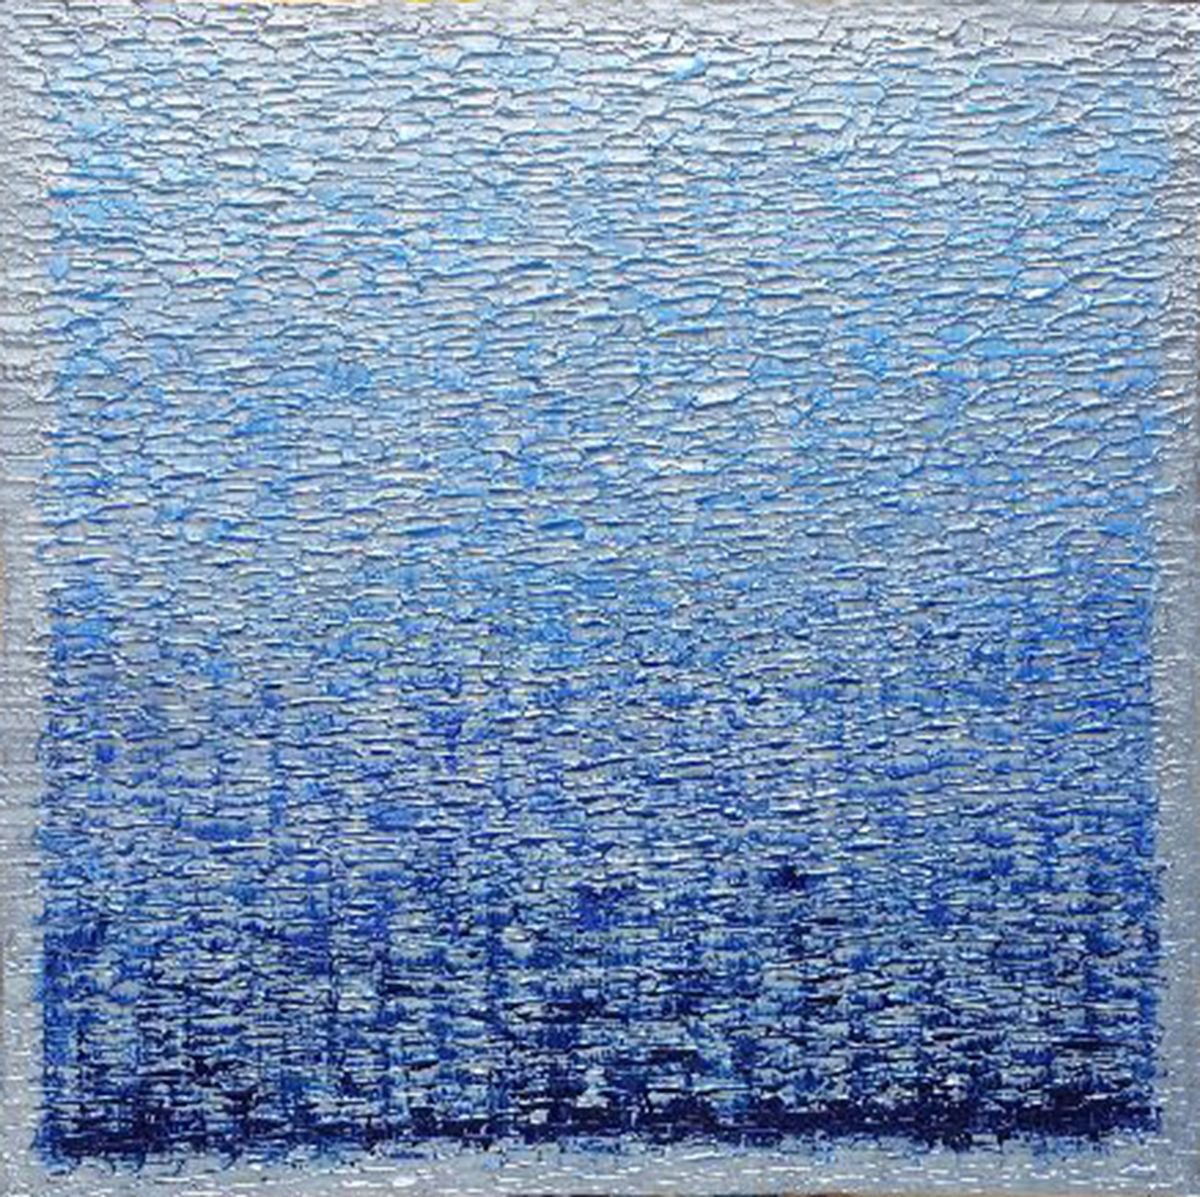 Abstract art - SILVER SEA - LARGE SQUARED BLUE ABSTRACT by VANADA ABSTRACT ART